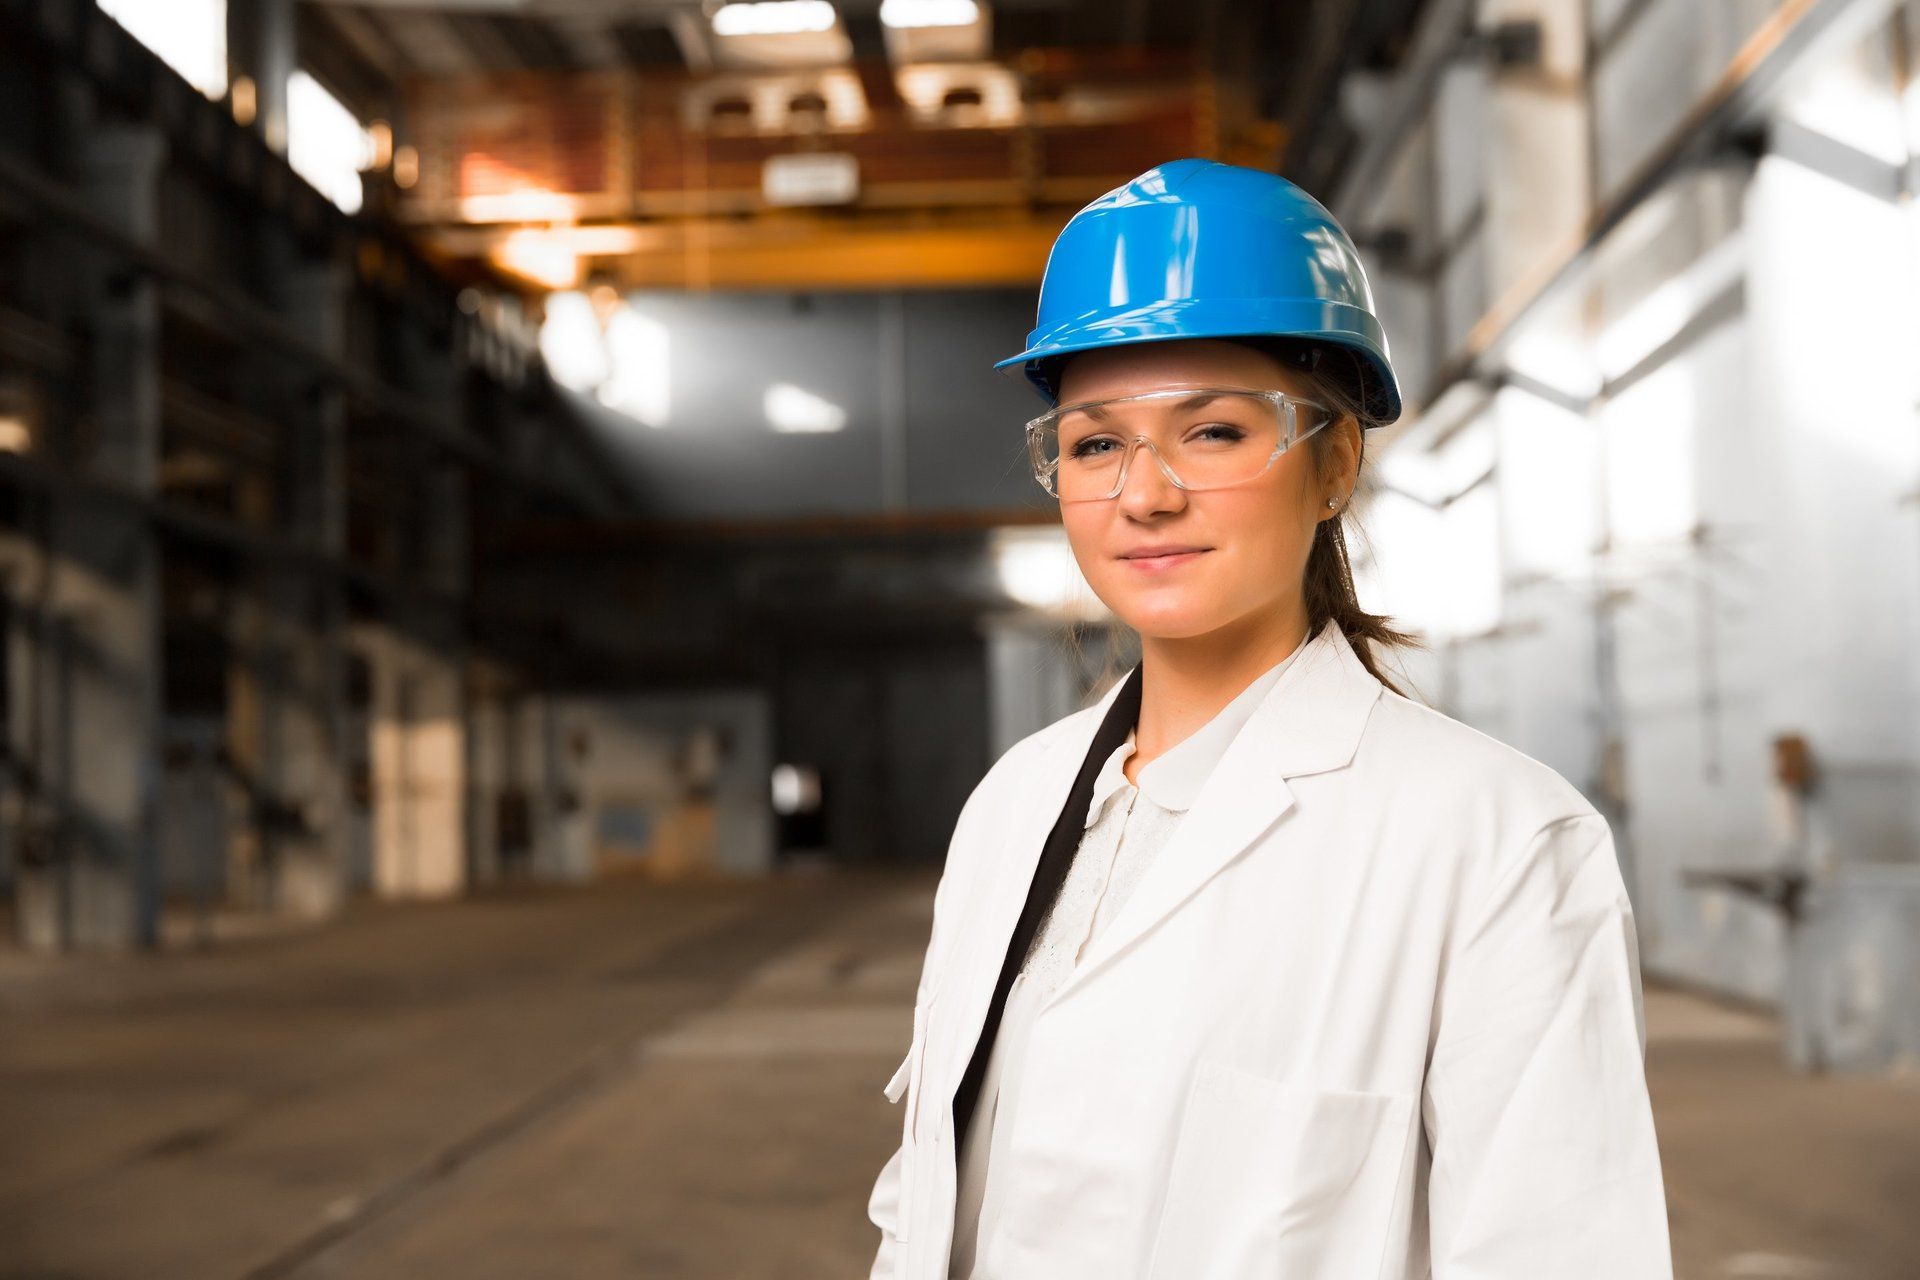 A female engineer, wearing a blue hard hat, standing in front of the factory.